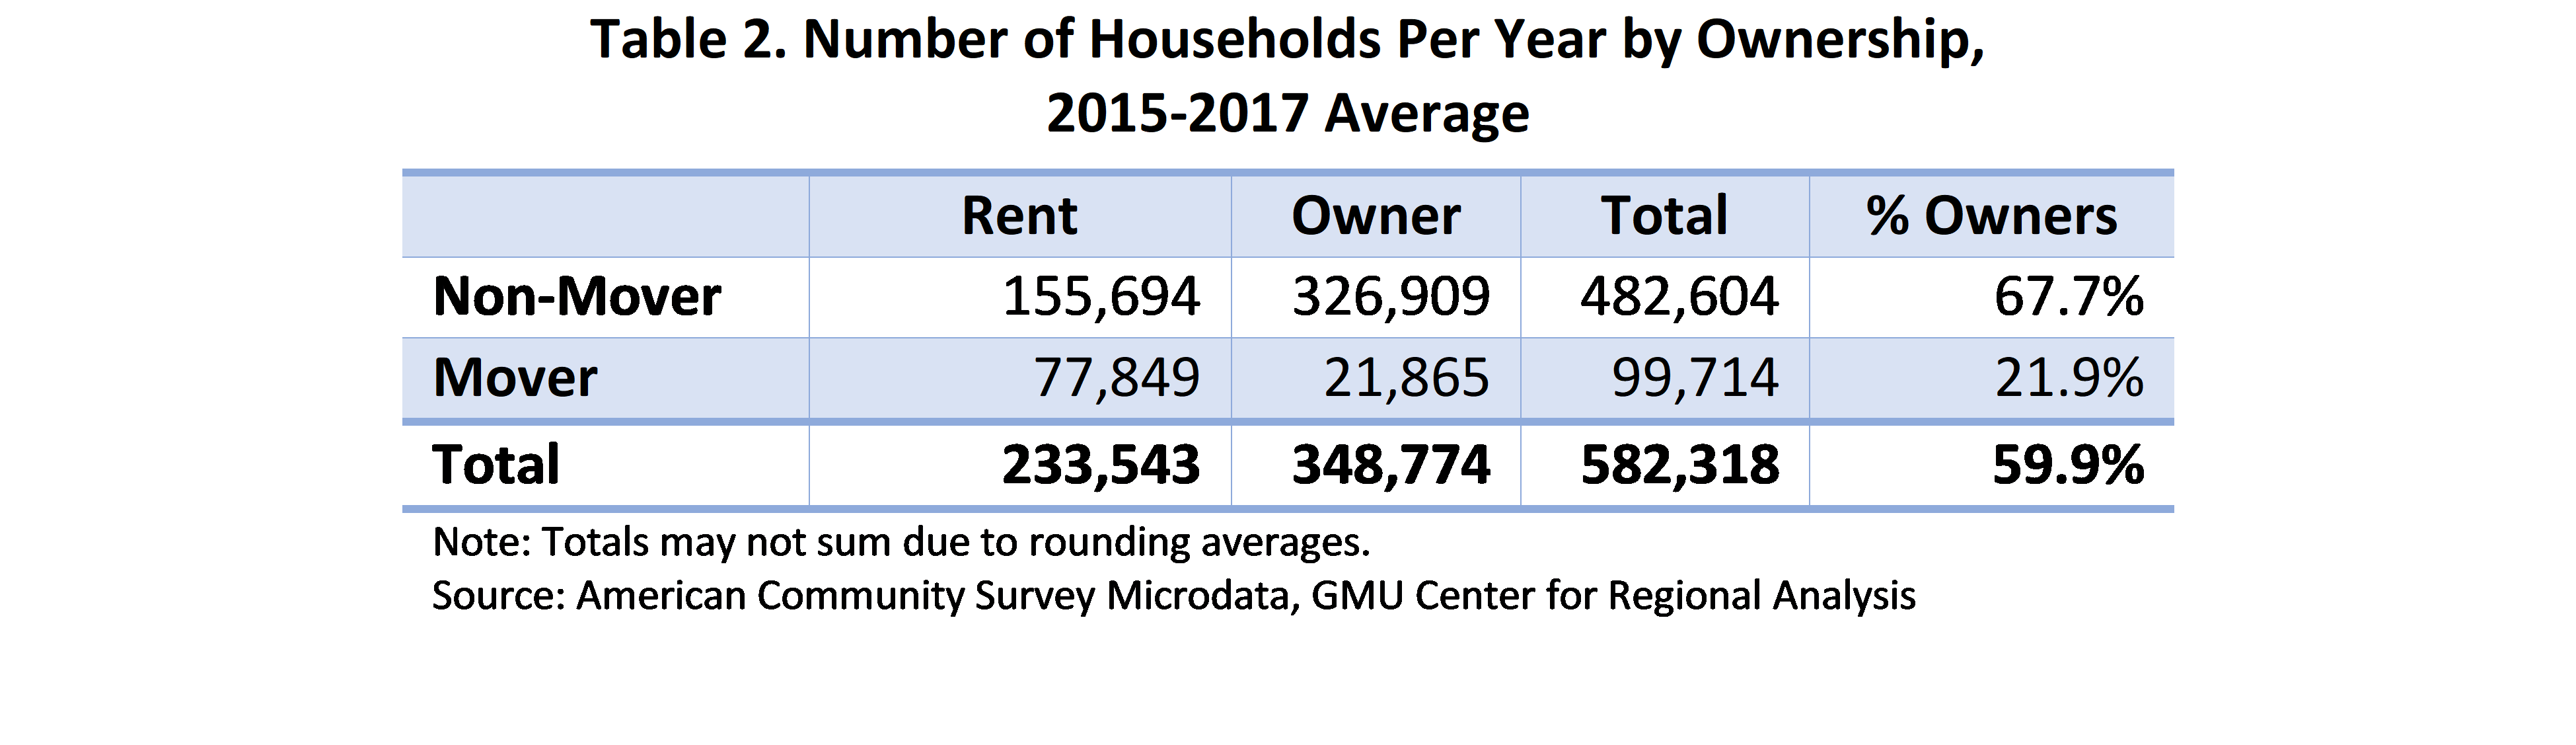 Table 2. Number of Households Per Year by Ownership